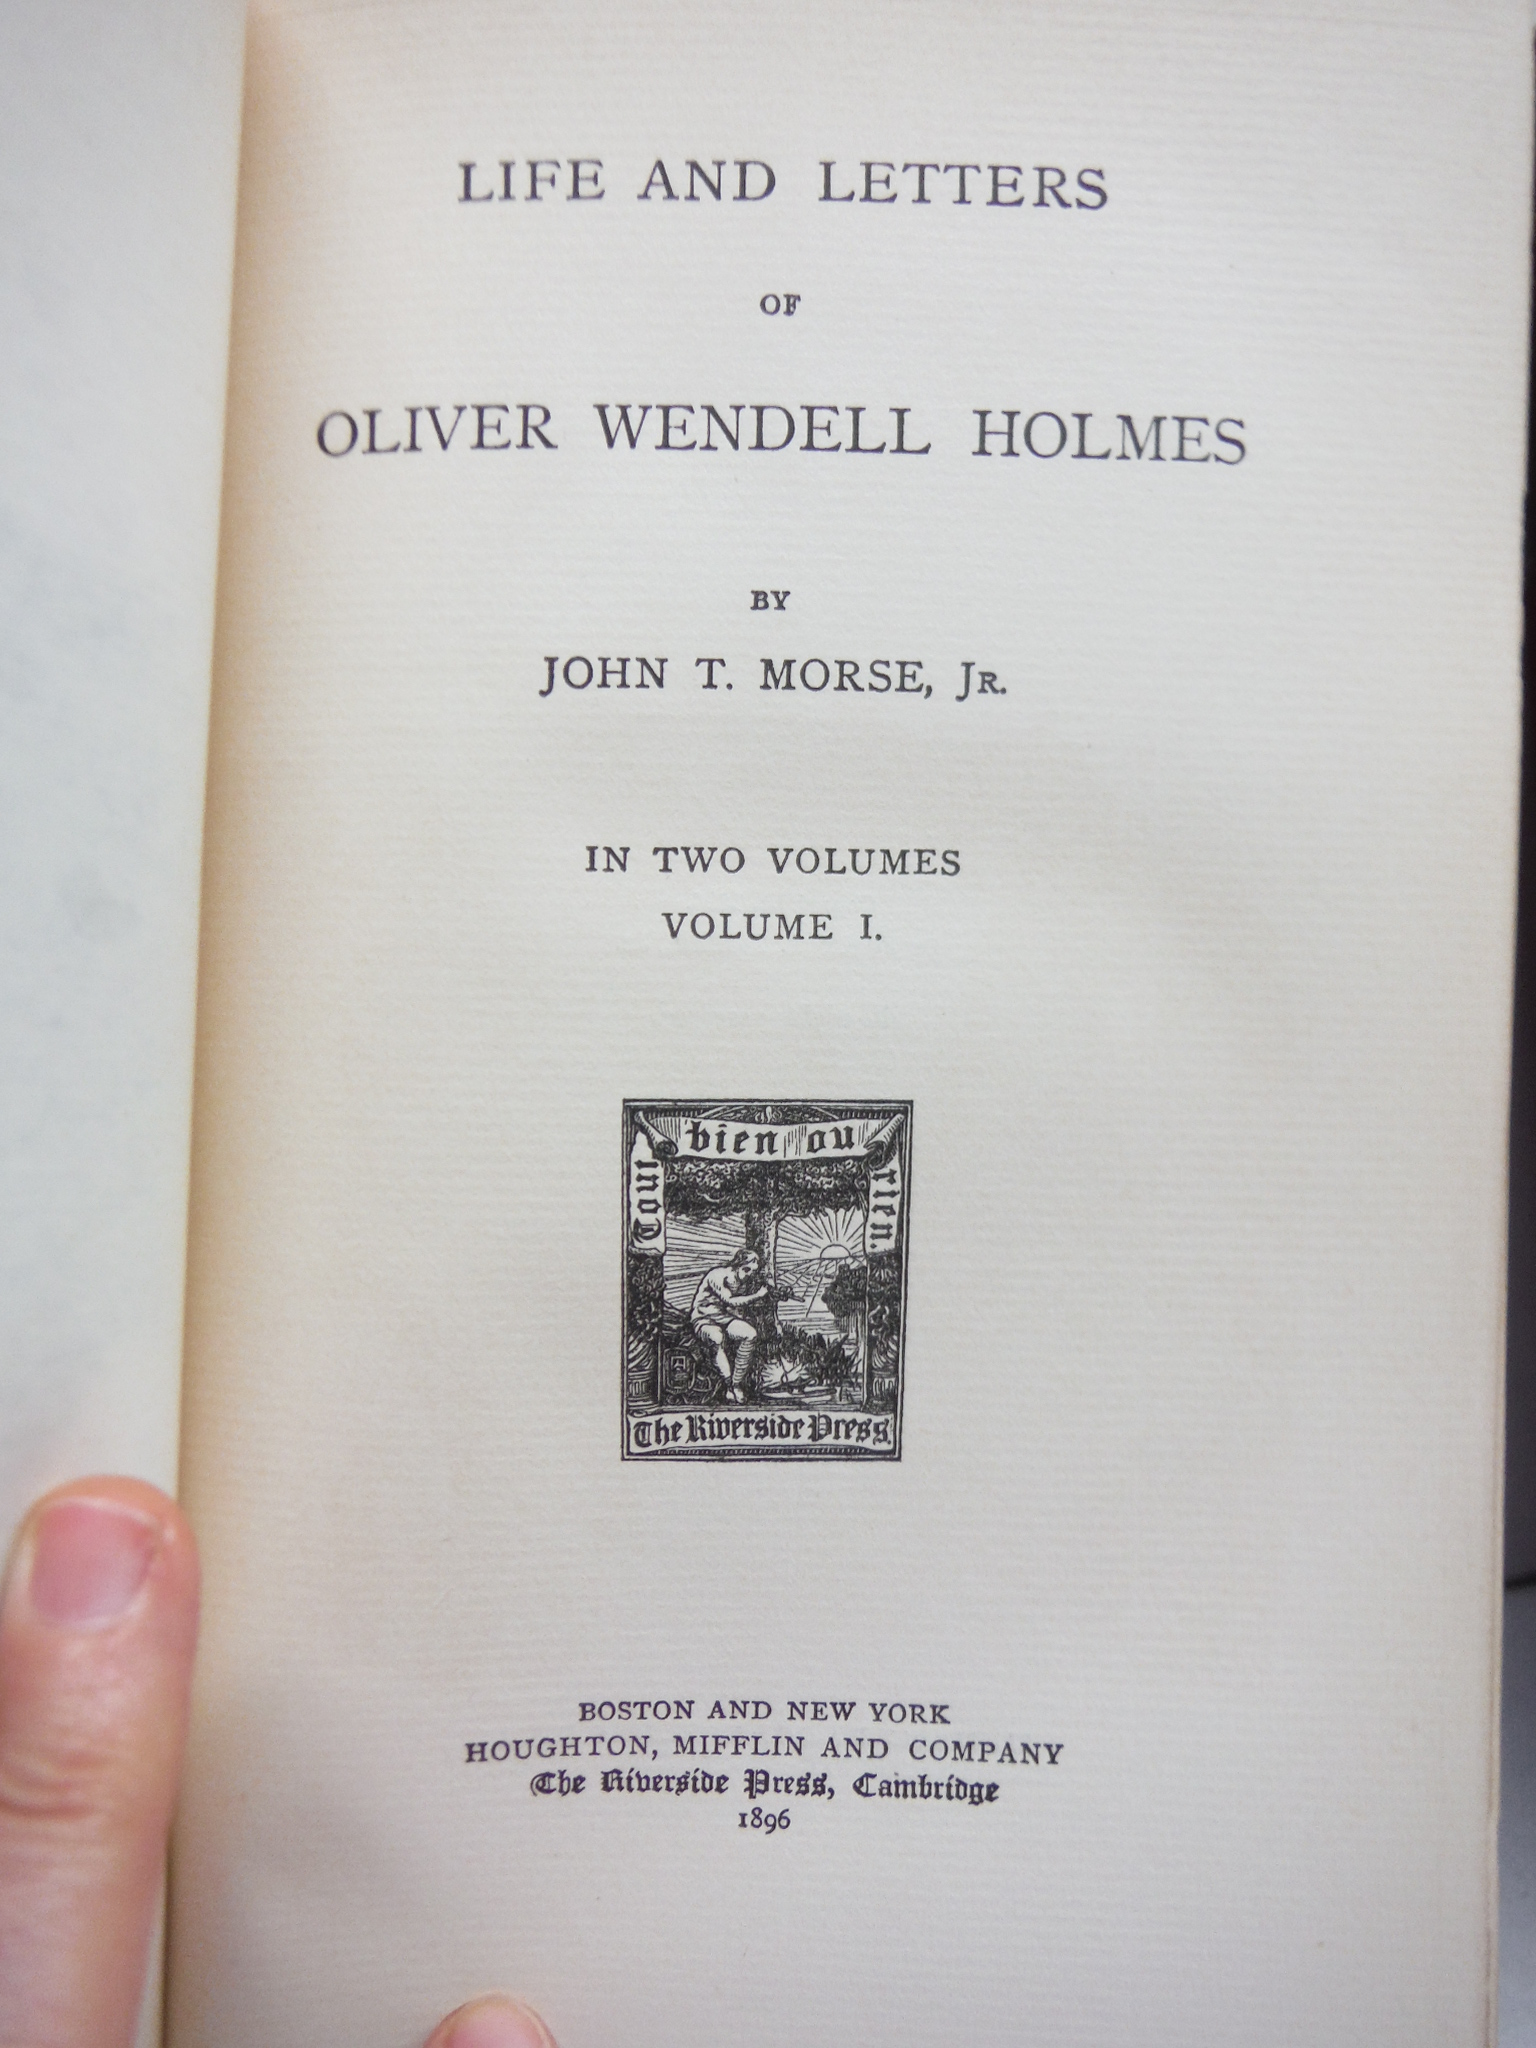 Image 2 of LIFE AND LETTERS OF OLIVER WENDELL HOLMES. 2 Volume Set.